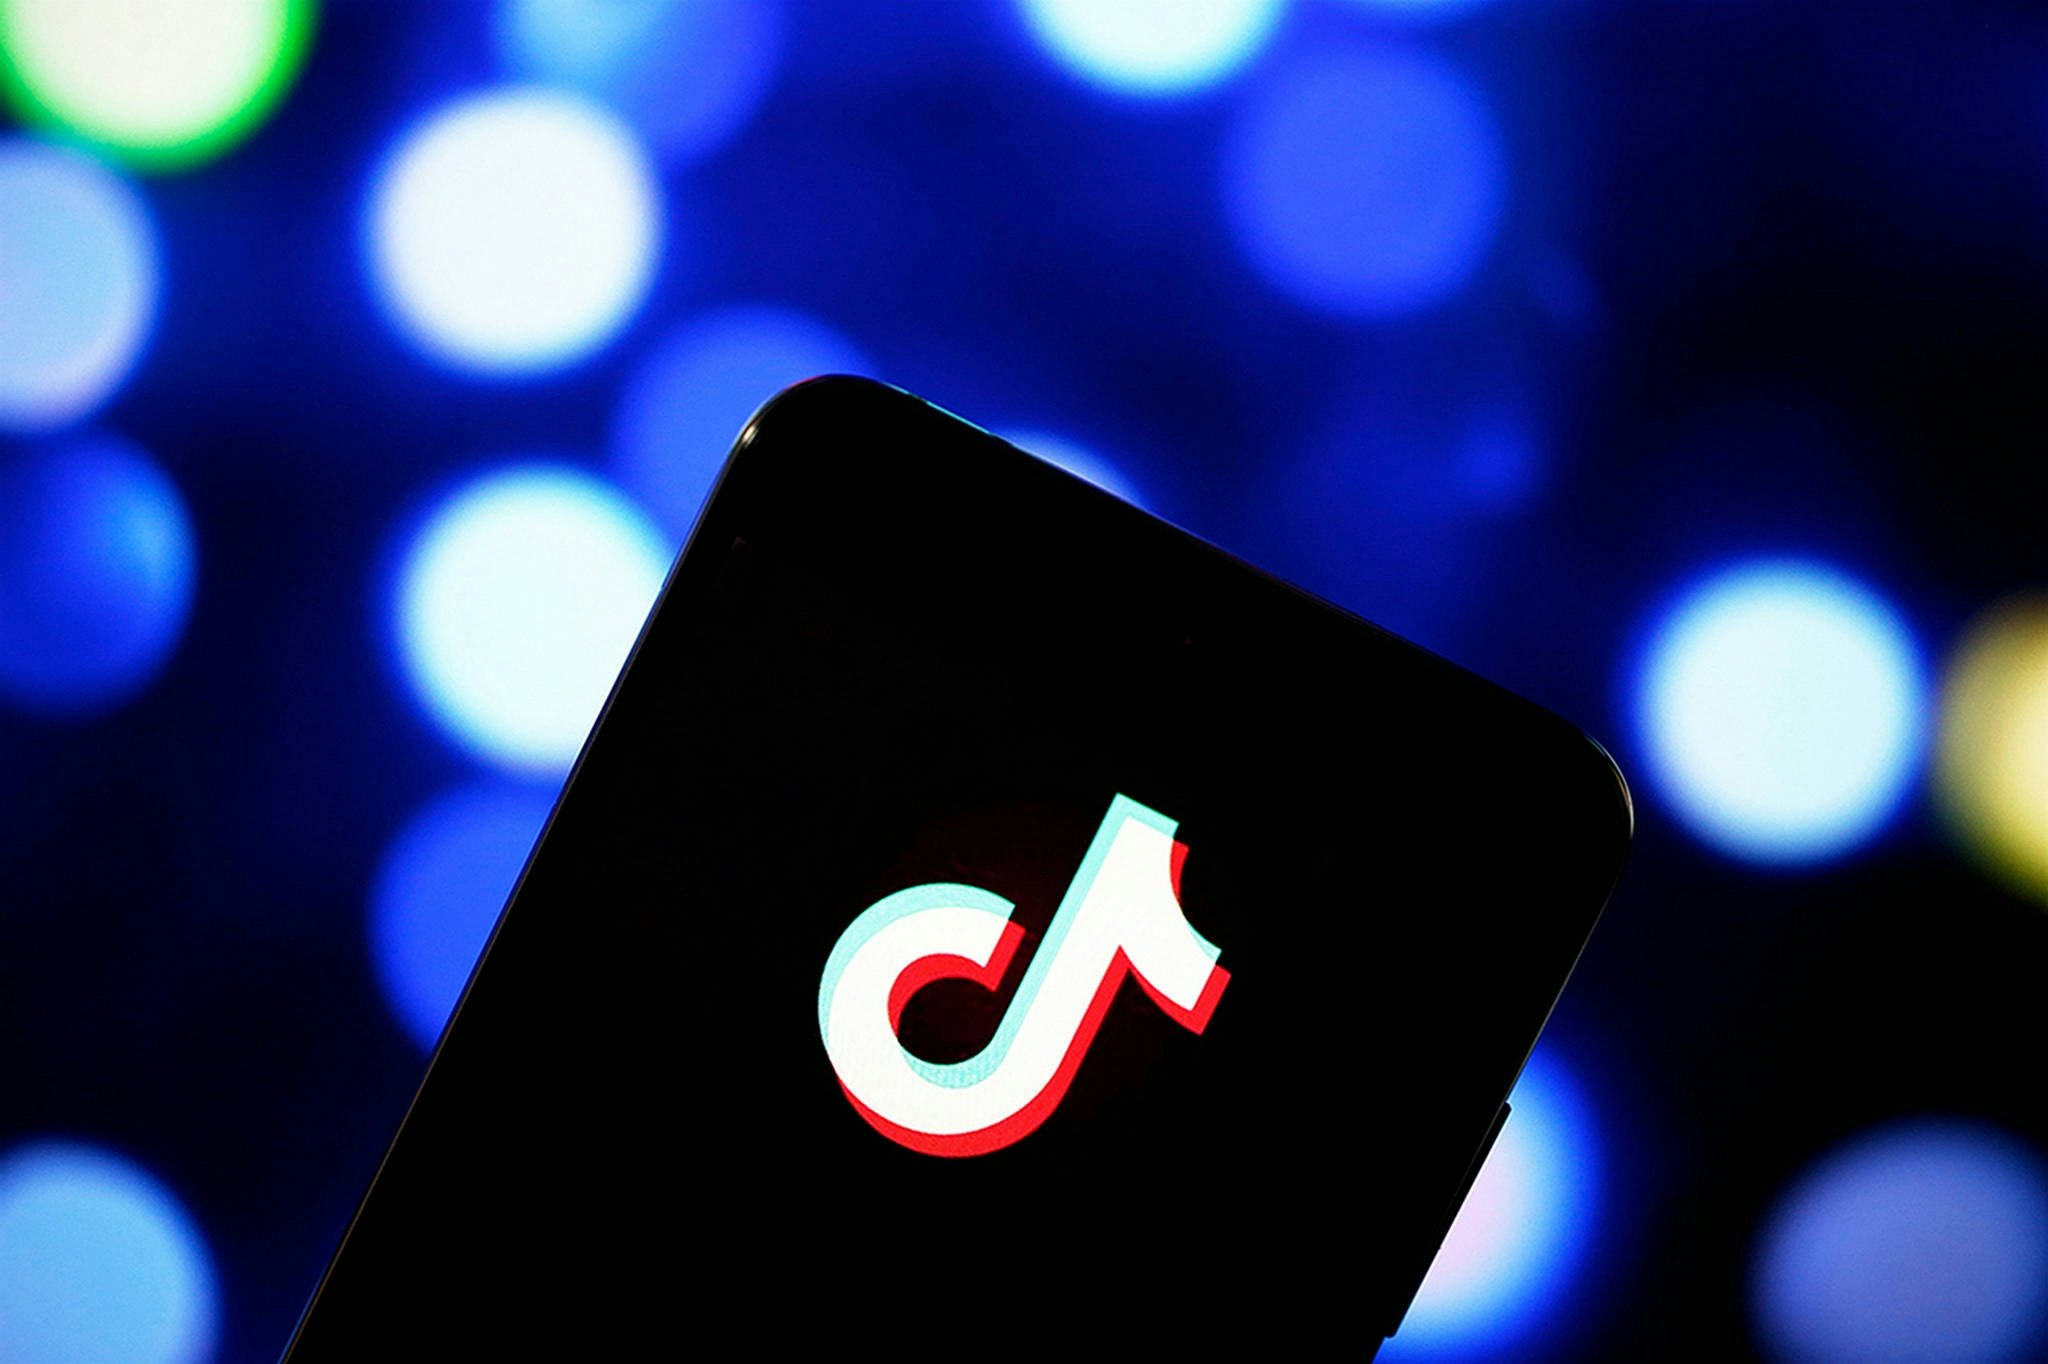 Douyin, a hip short video app that is keenly sought after by young social media users in China, has hit the radar of luxury marketers. Photo: VCG